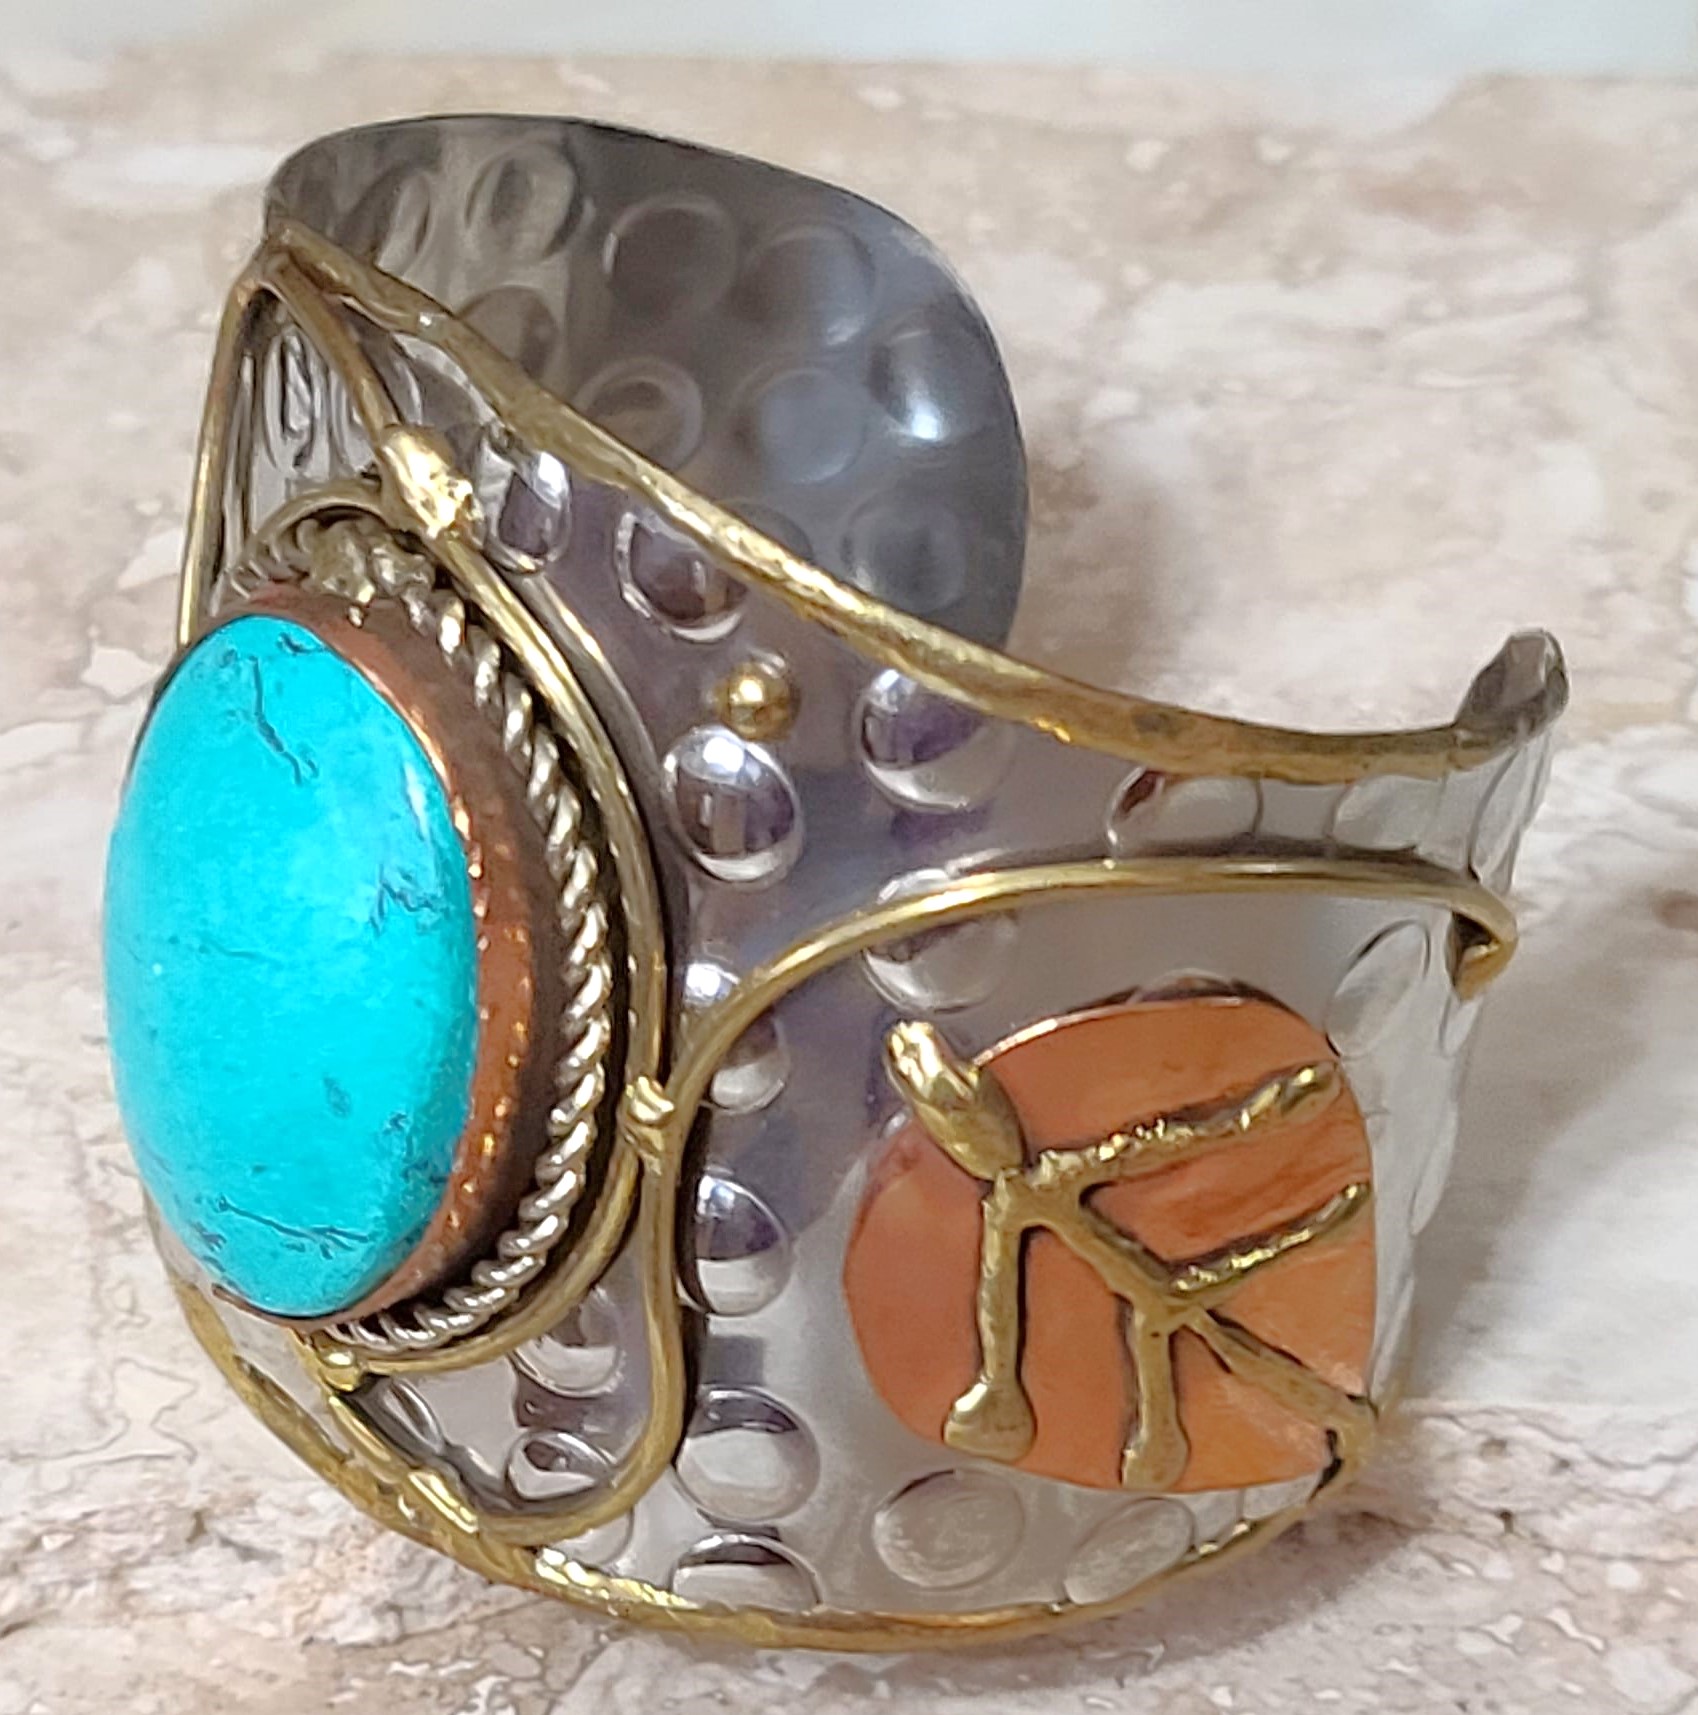 Cuff bracelet, with center howlite gemstone, tri color metals, copper, silver and brass